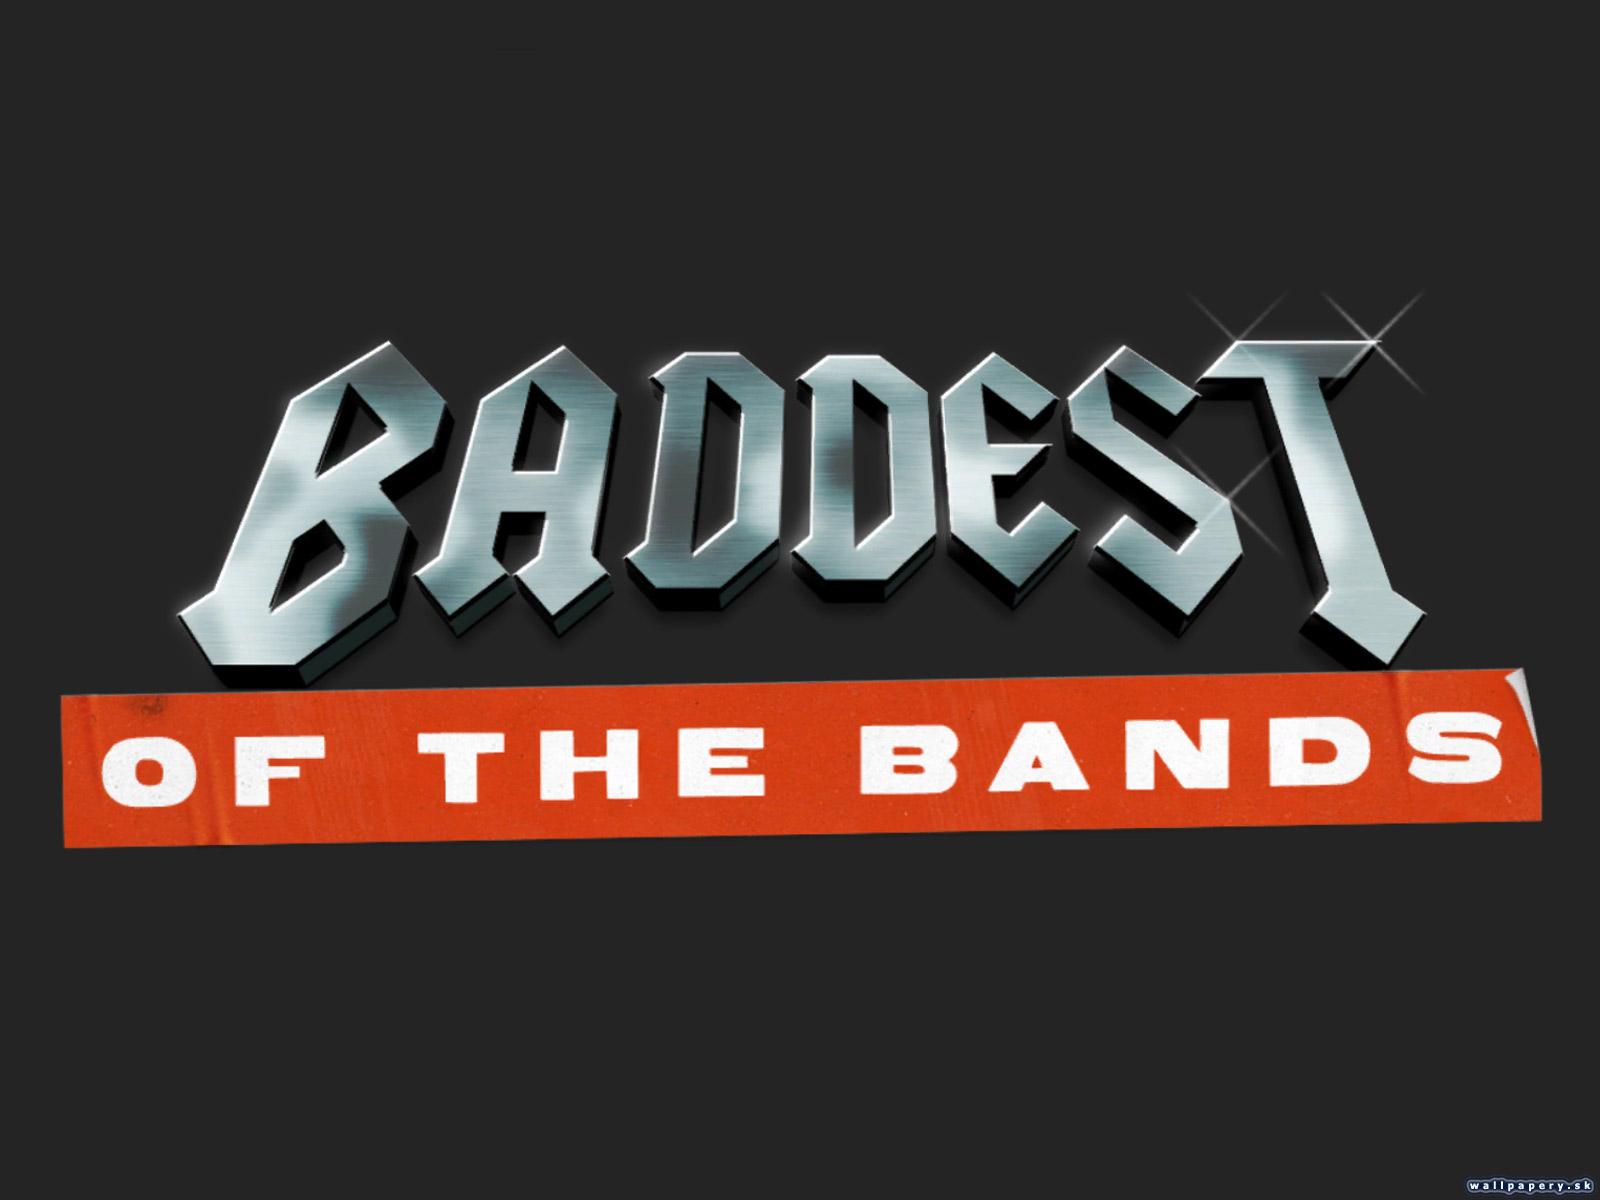 Strong Bad's Episode 3: Baddest of the Bands - wallpaper 2